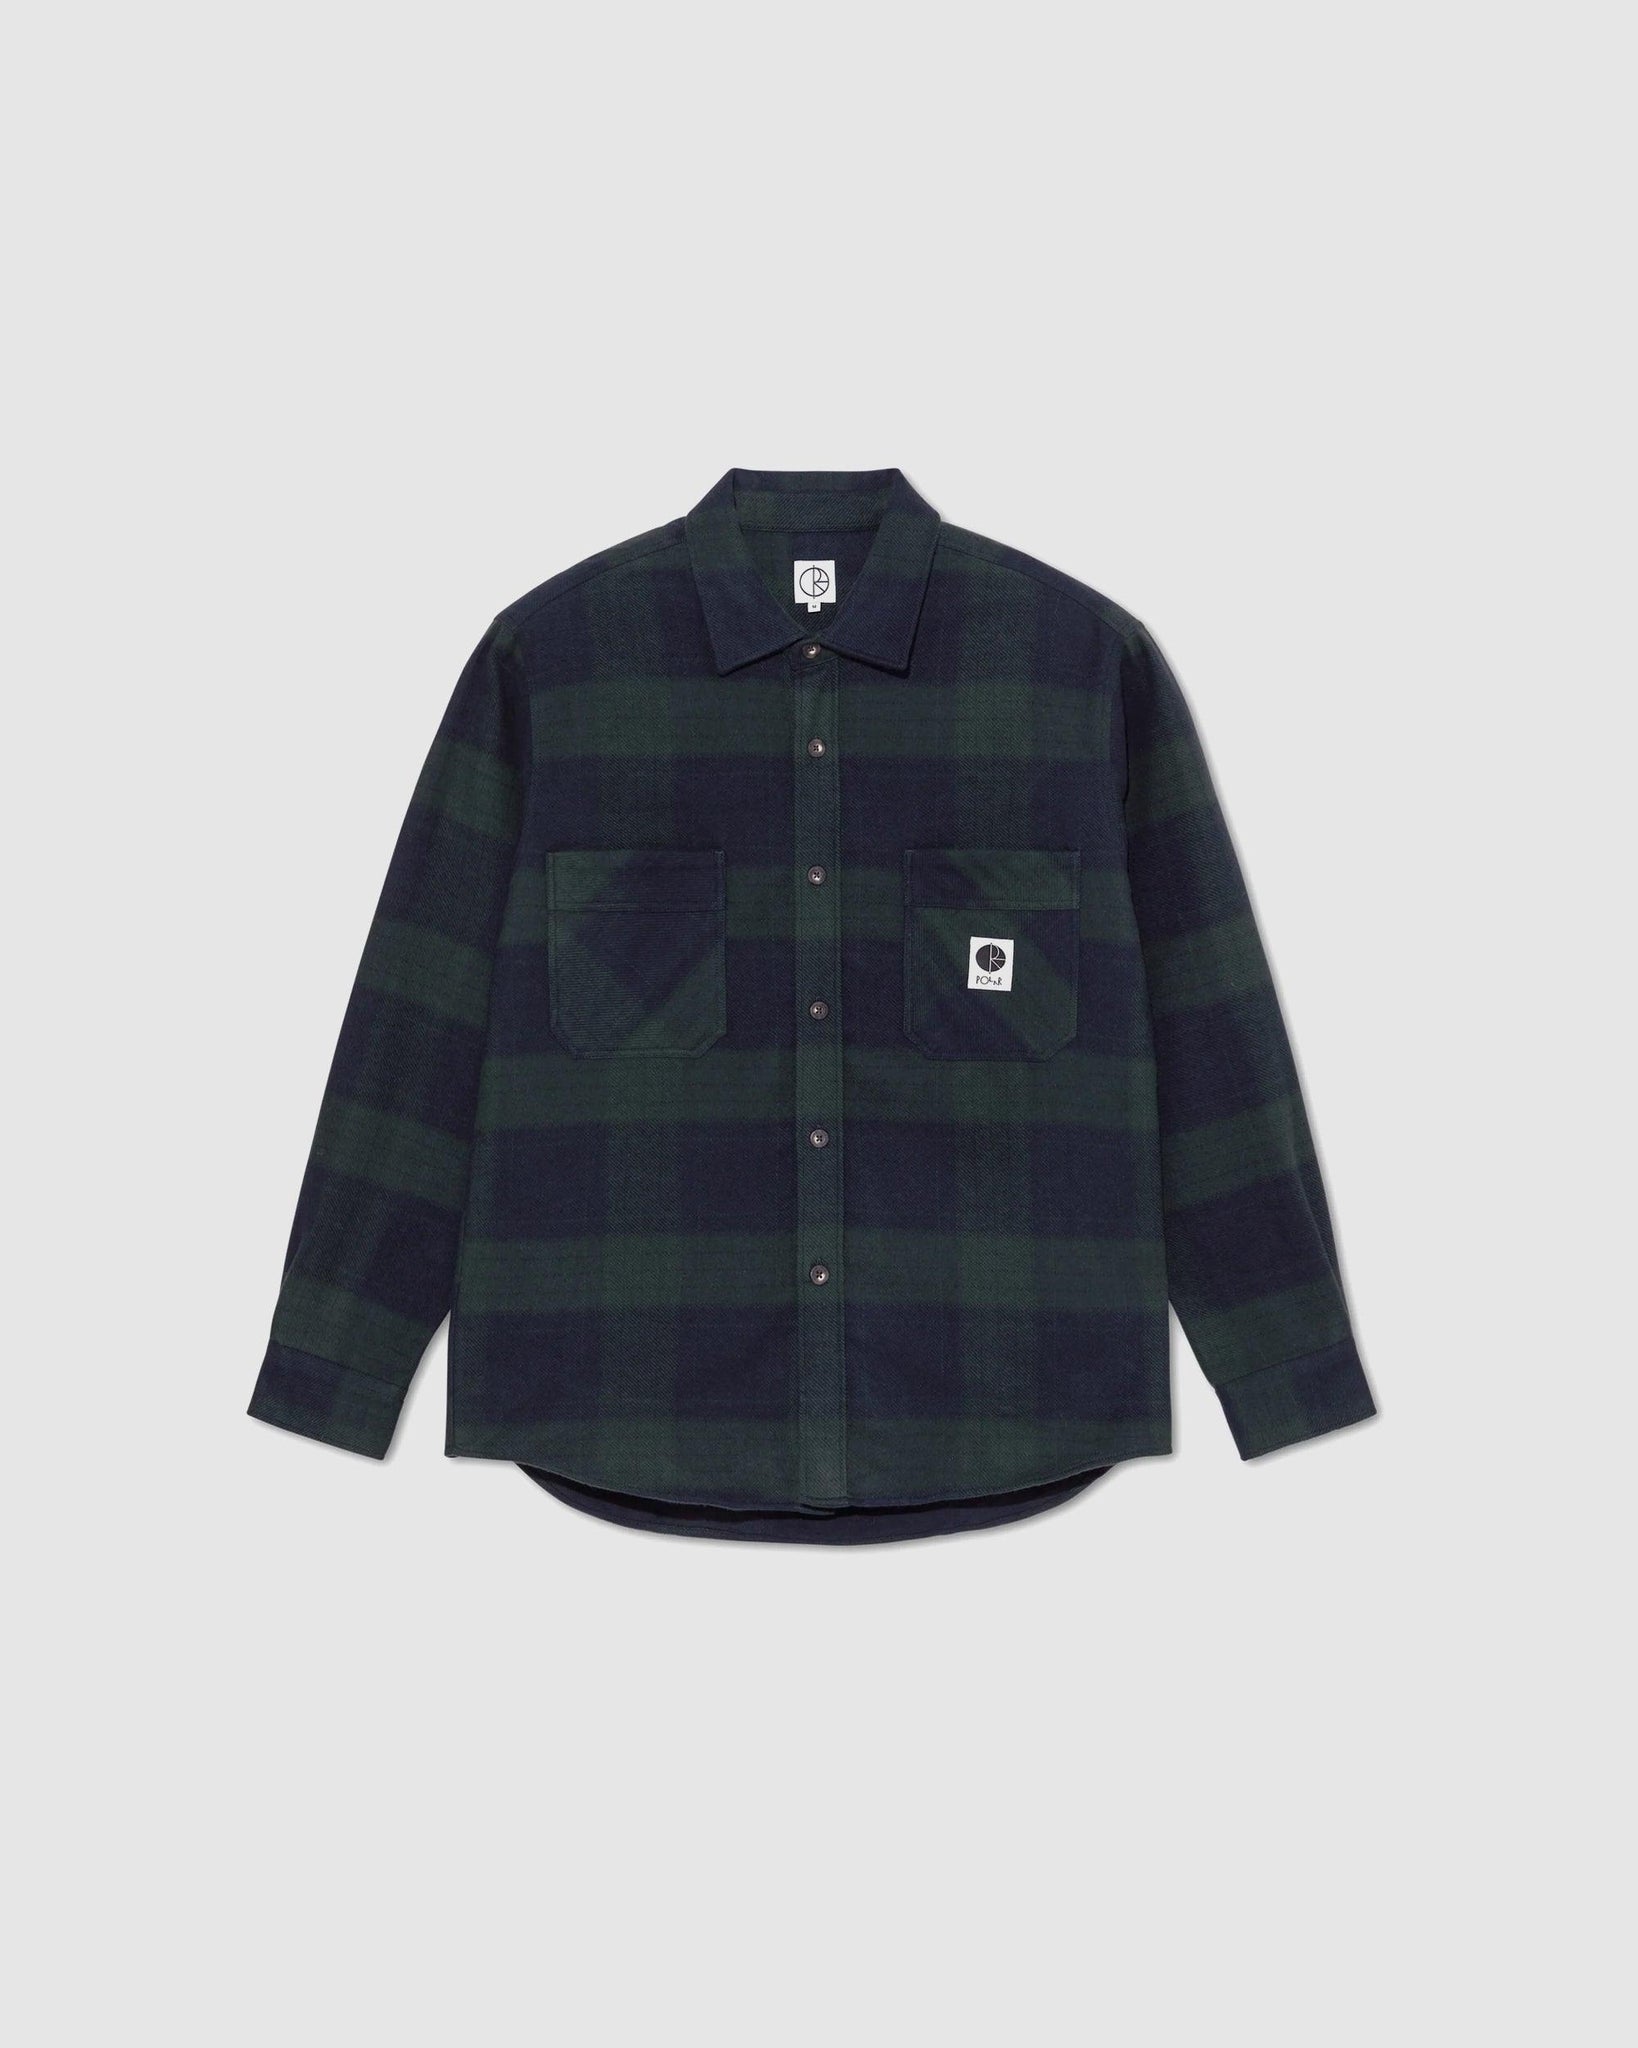 Mike LS Shirt Flannel Navy/Teal - {{ collection.title }} - Chinatown Country Club 